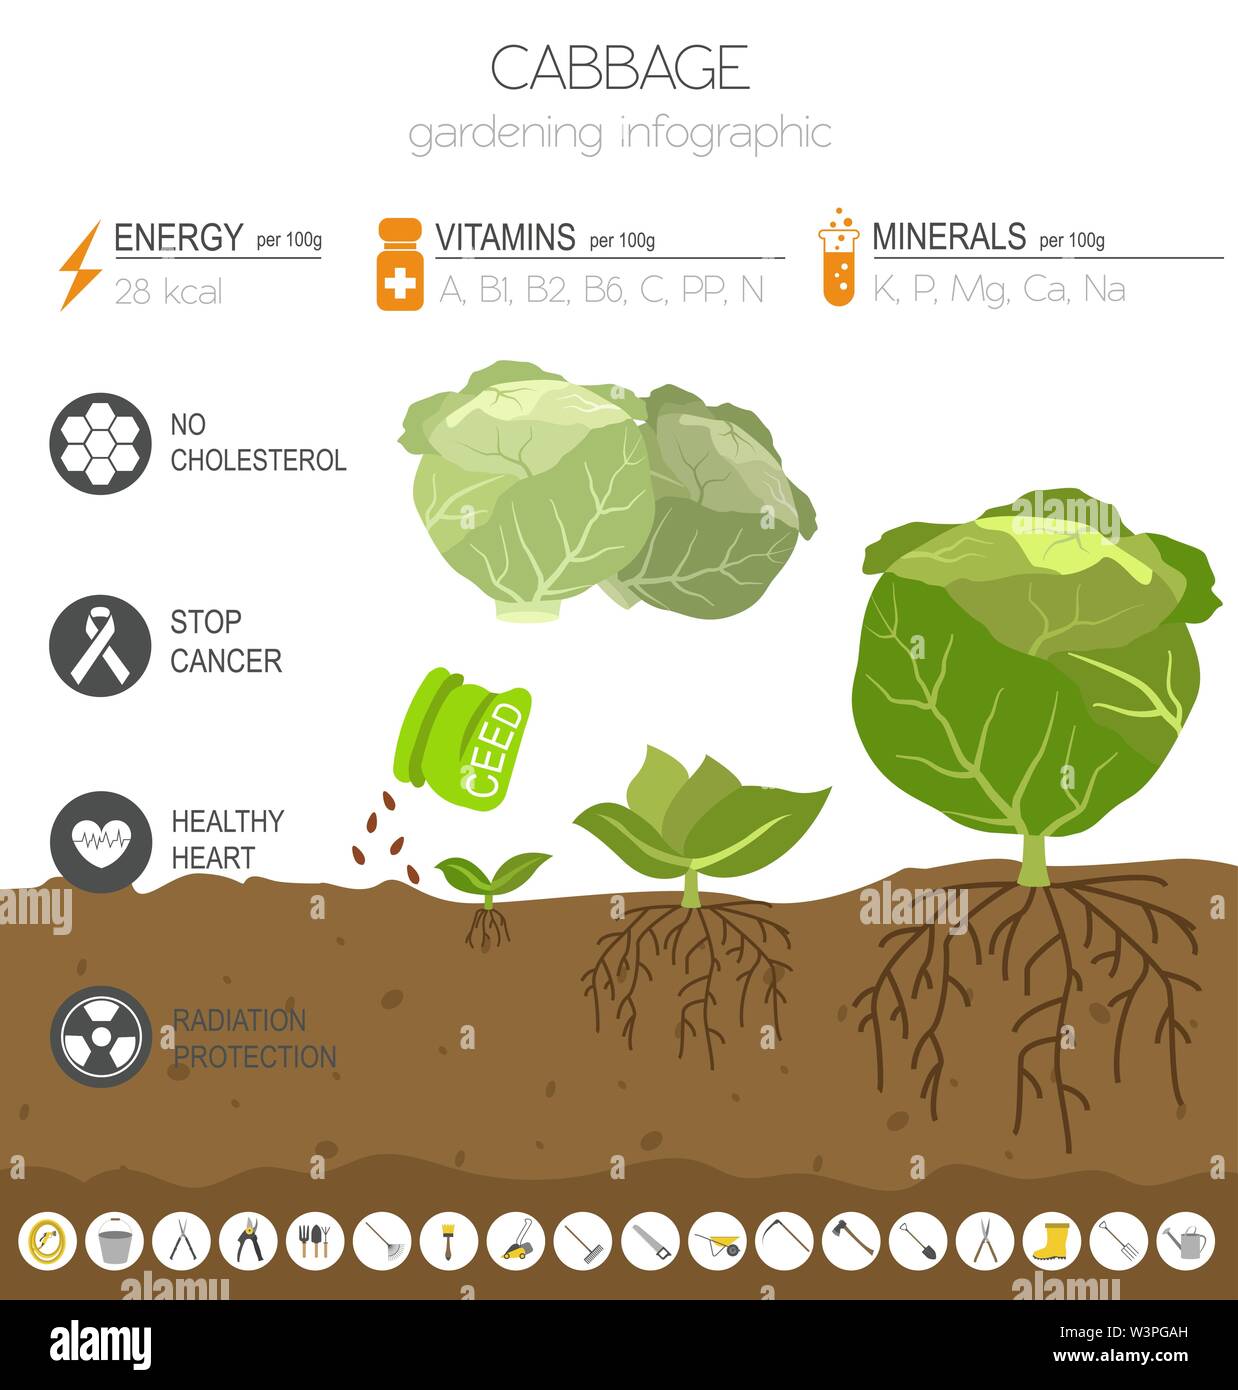 Cabbage beneficial features graphic template. Gardening, farming infographic, how it grows. Flat style design. Vector illustration Stock Vector